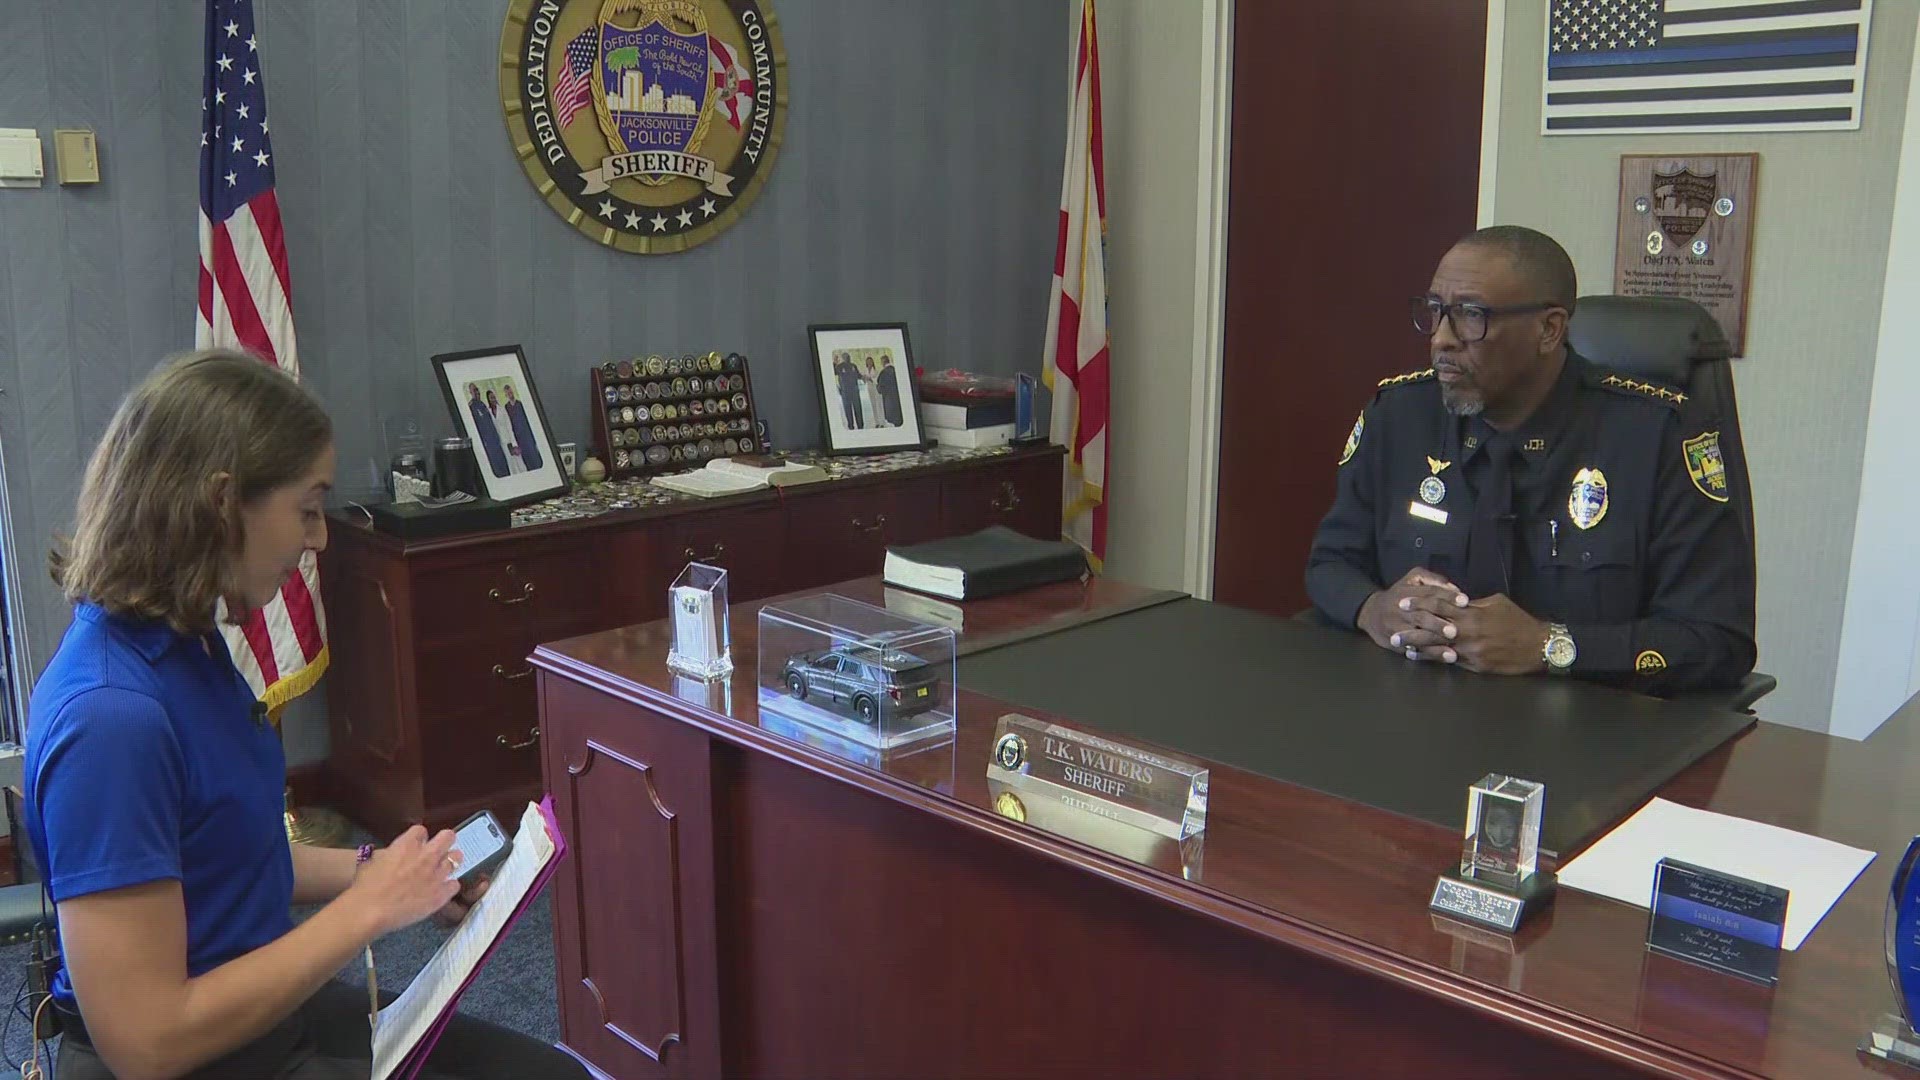 Following the arrest of Josue Garigga, Jacksonville Sheriff T.K. Waters spoke with First Coast News about transparency and integrity at JSO.